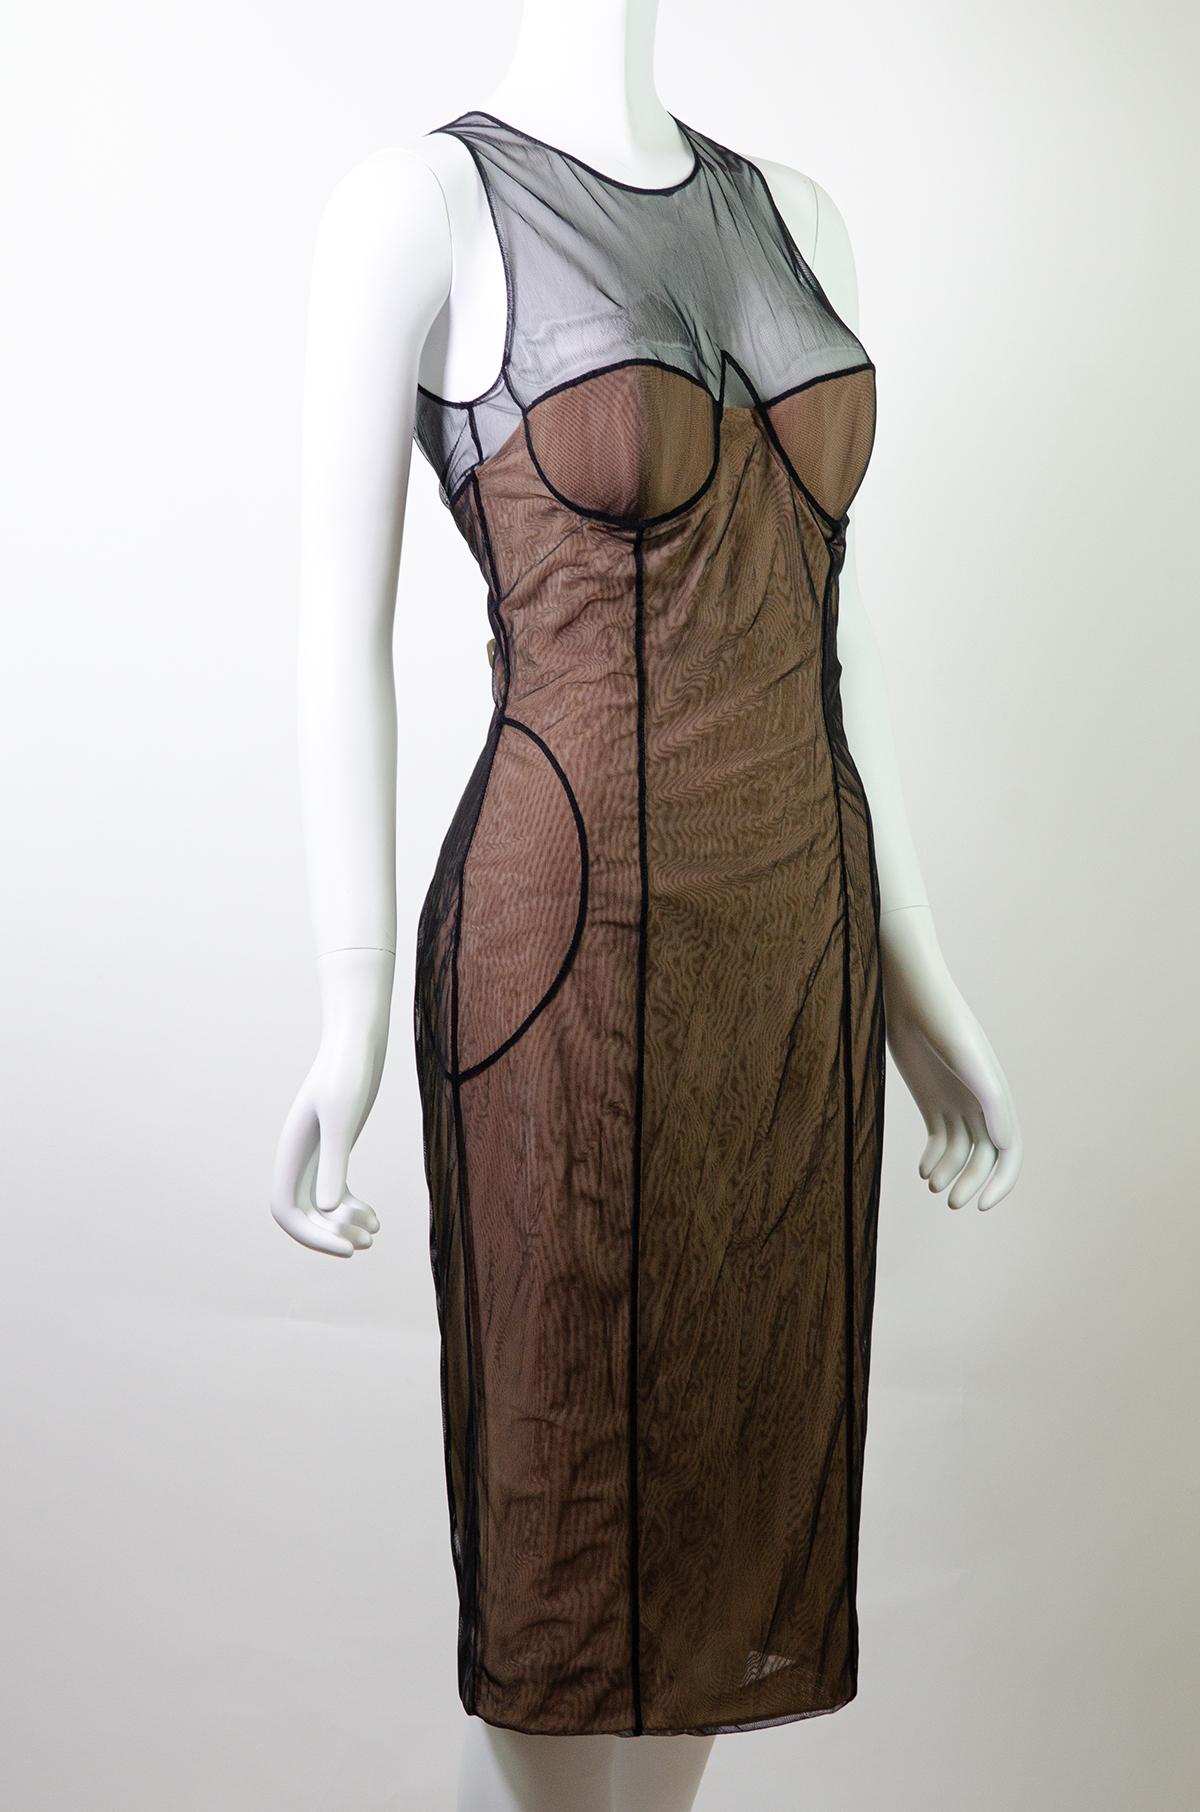 GUCCI by TOM FORD S/S 2001 Mesh Corset Runway Dress New with Tags IT42 For Sale 2